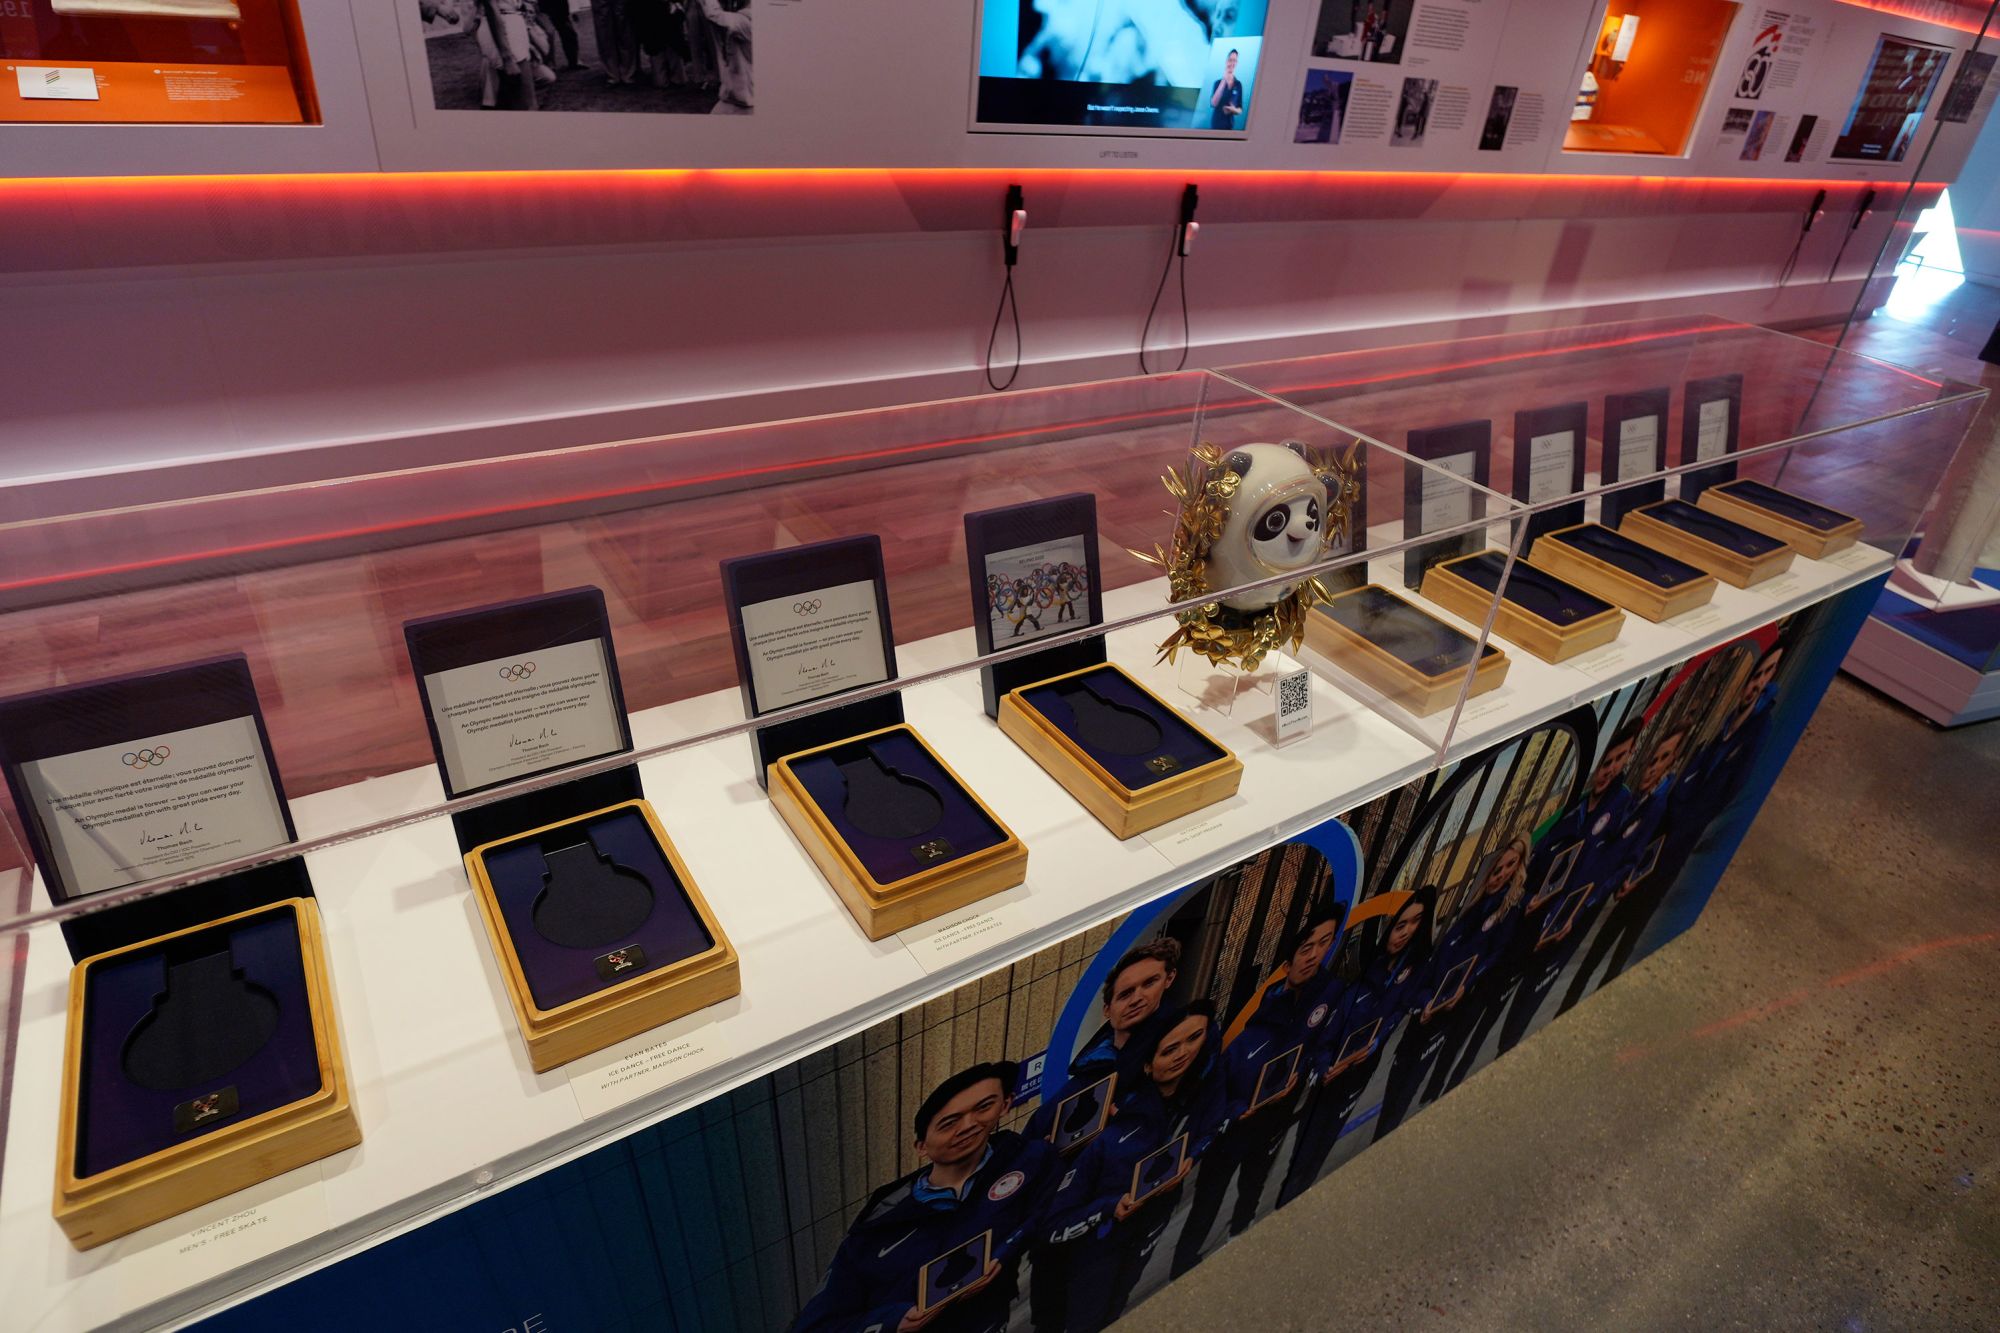 Nine empty boxes, which belong to members of the U.S. figure skating team who finished in second place last year in the Winter Olympics in Beijing, sit in a display case in the U.S. Olympic and Paralympic Museum on Thursday, June 22, 2023, in Colorado Springs, Colo. The figure skaters have not received their medals while a doping case involving a Russian skater plays out. (AP Photo/David Zalubowski)